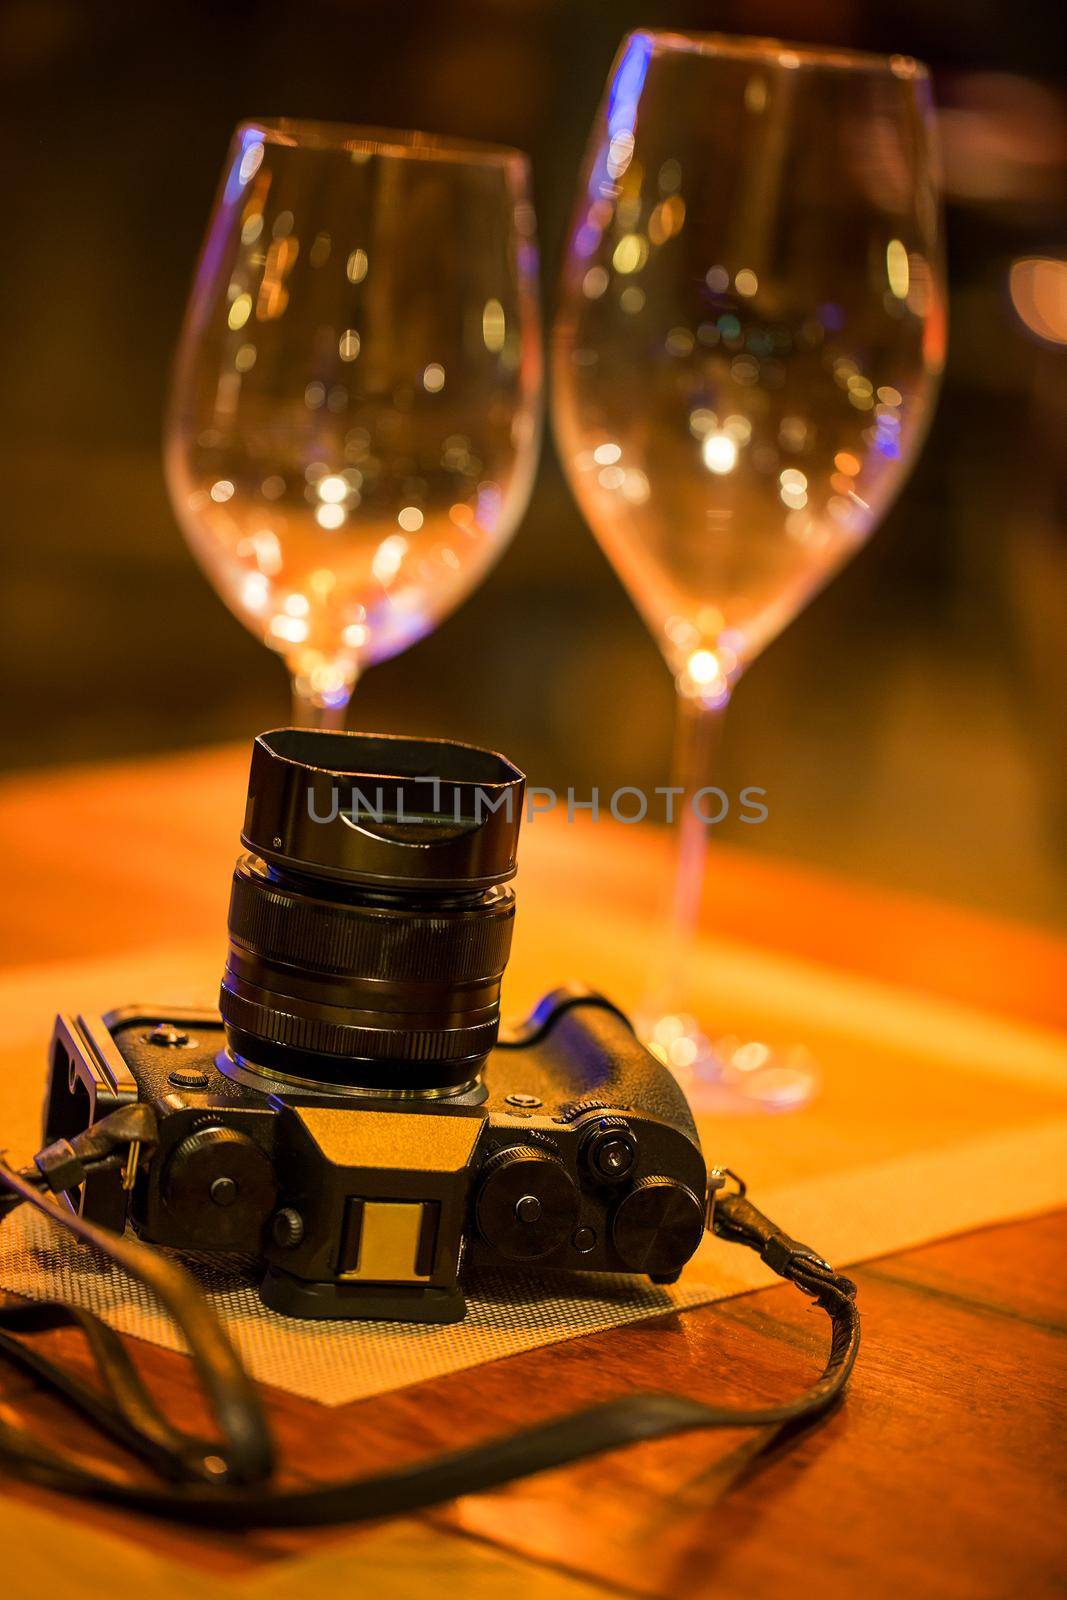 Camera on wooden table in restaurant